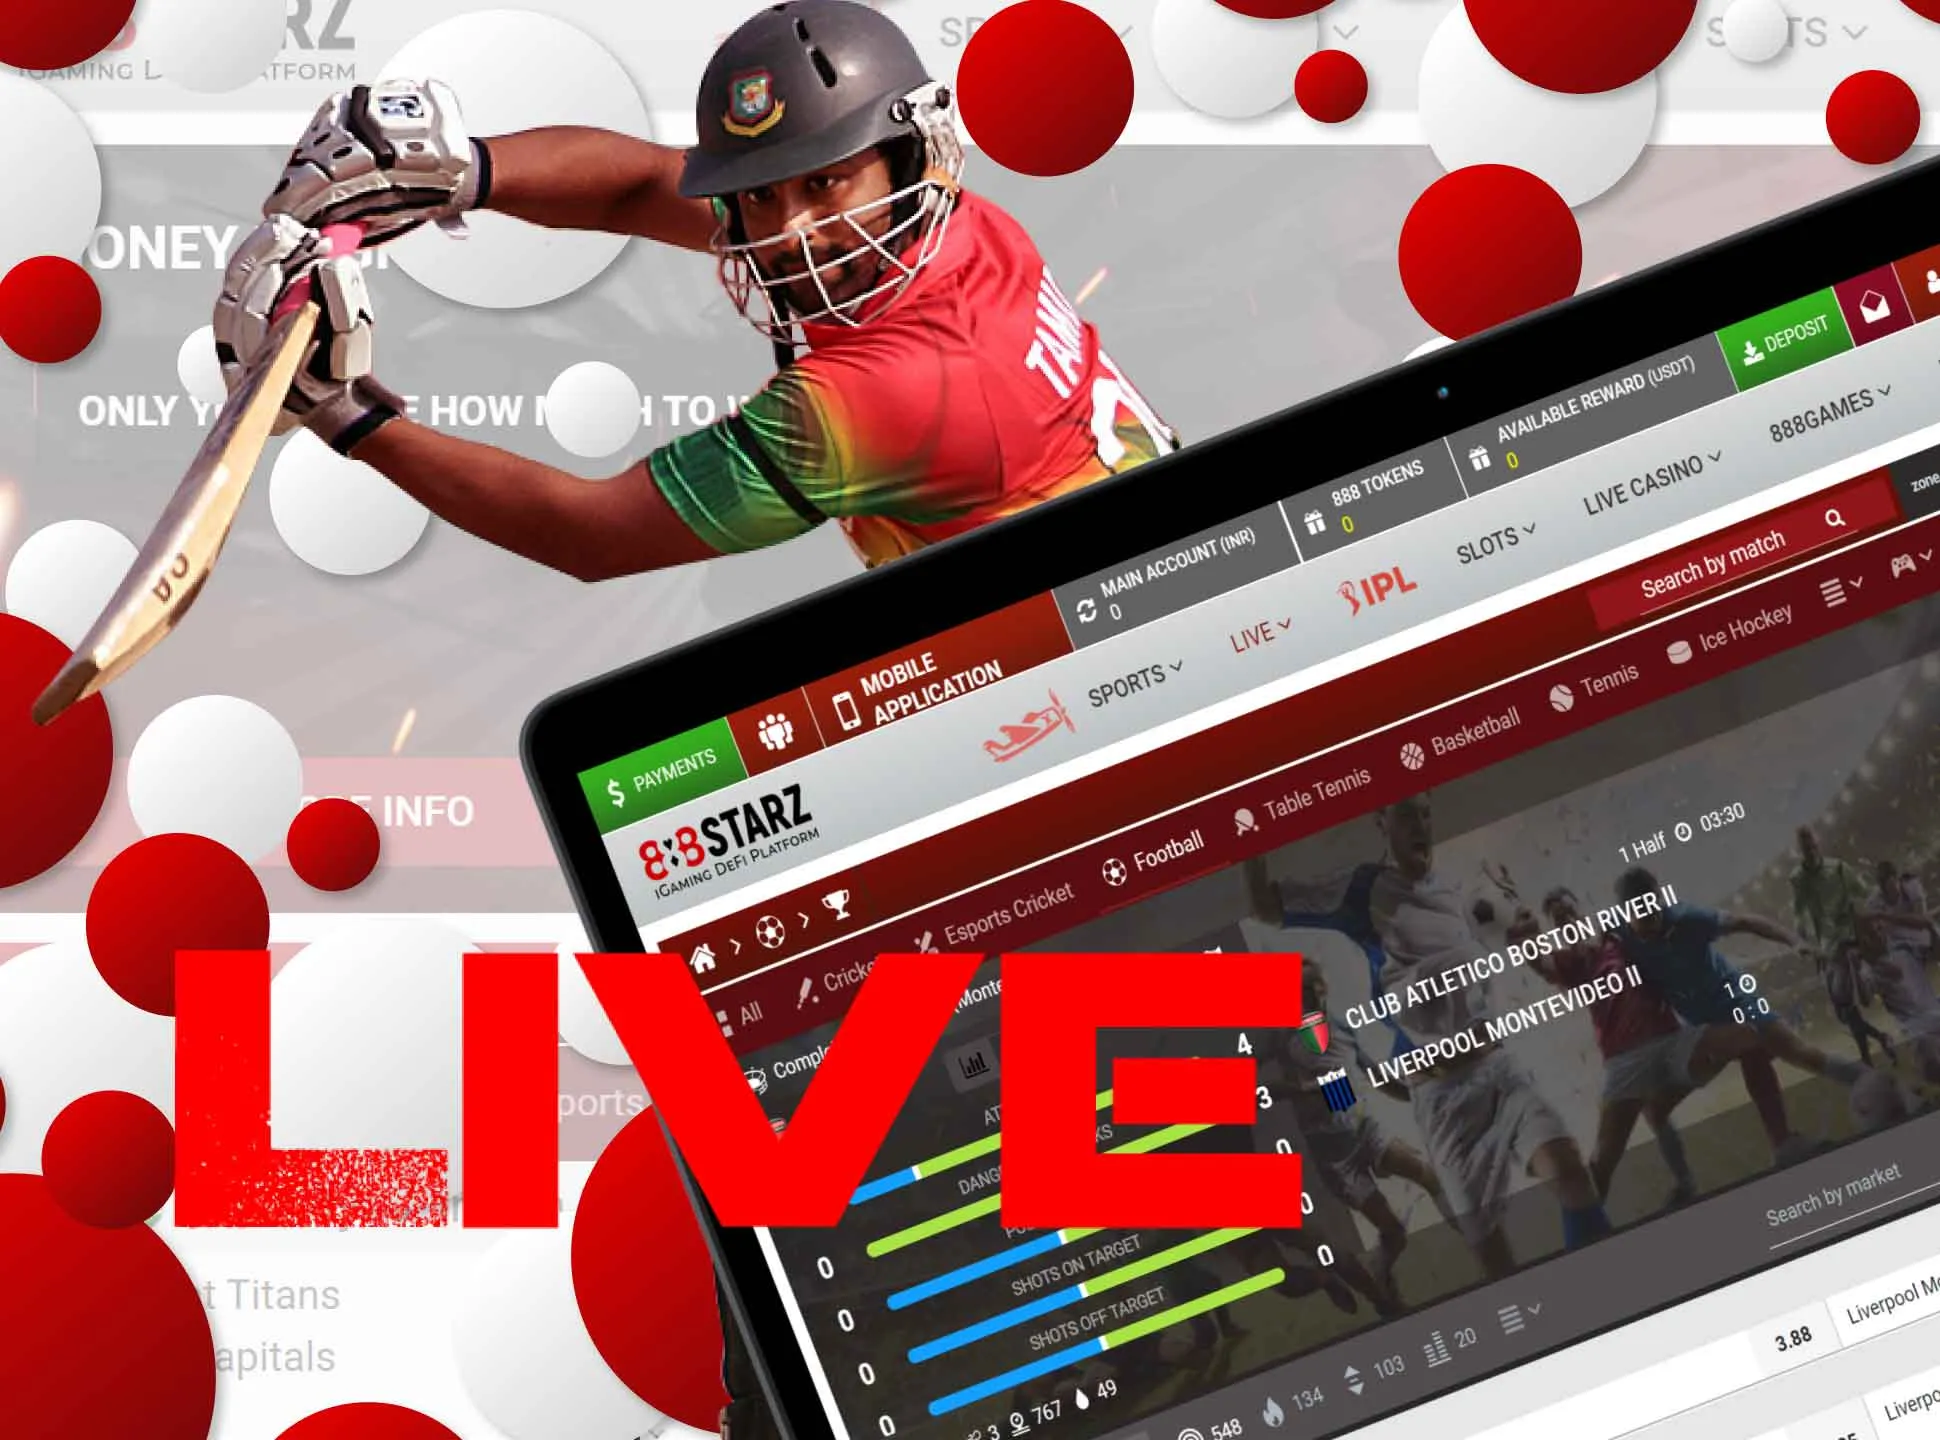 You can watch live streamings of the matches right on the 88starz site or in the app.